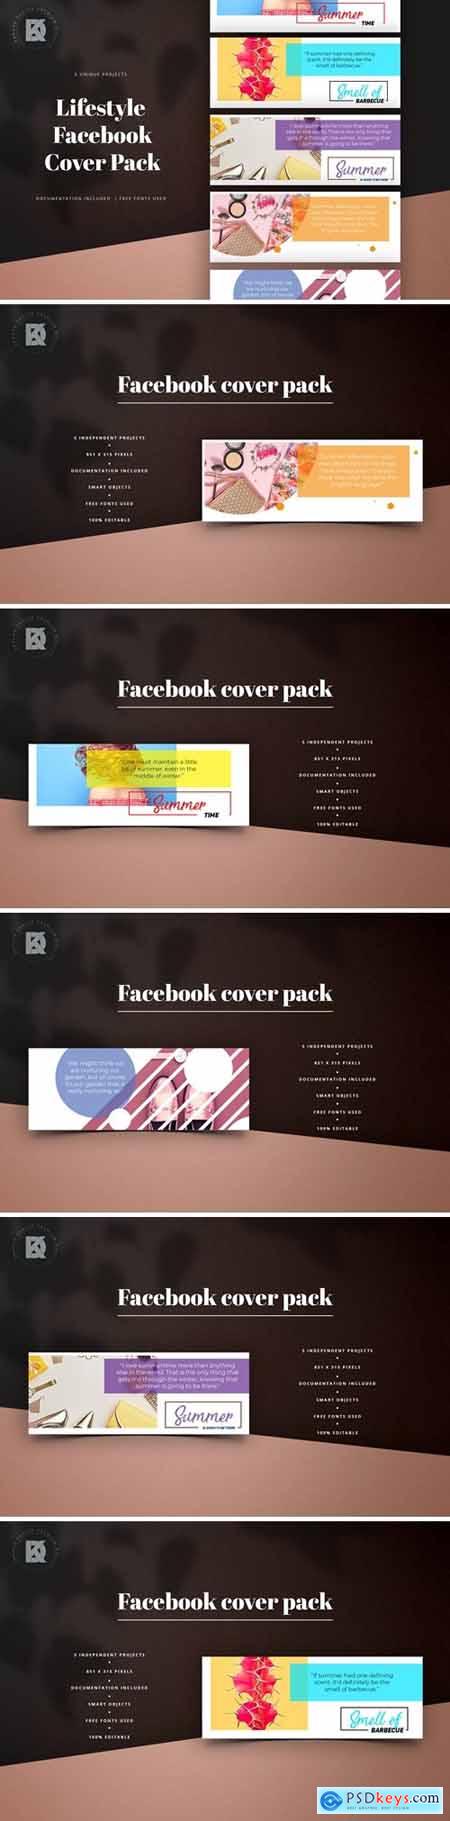 Lifestyle Facebook Cover Pack